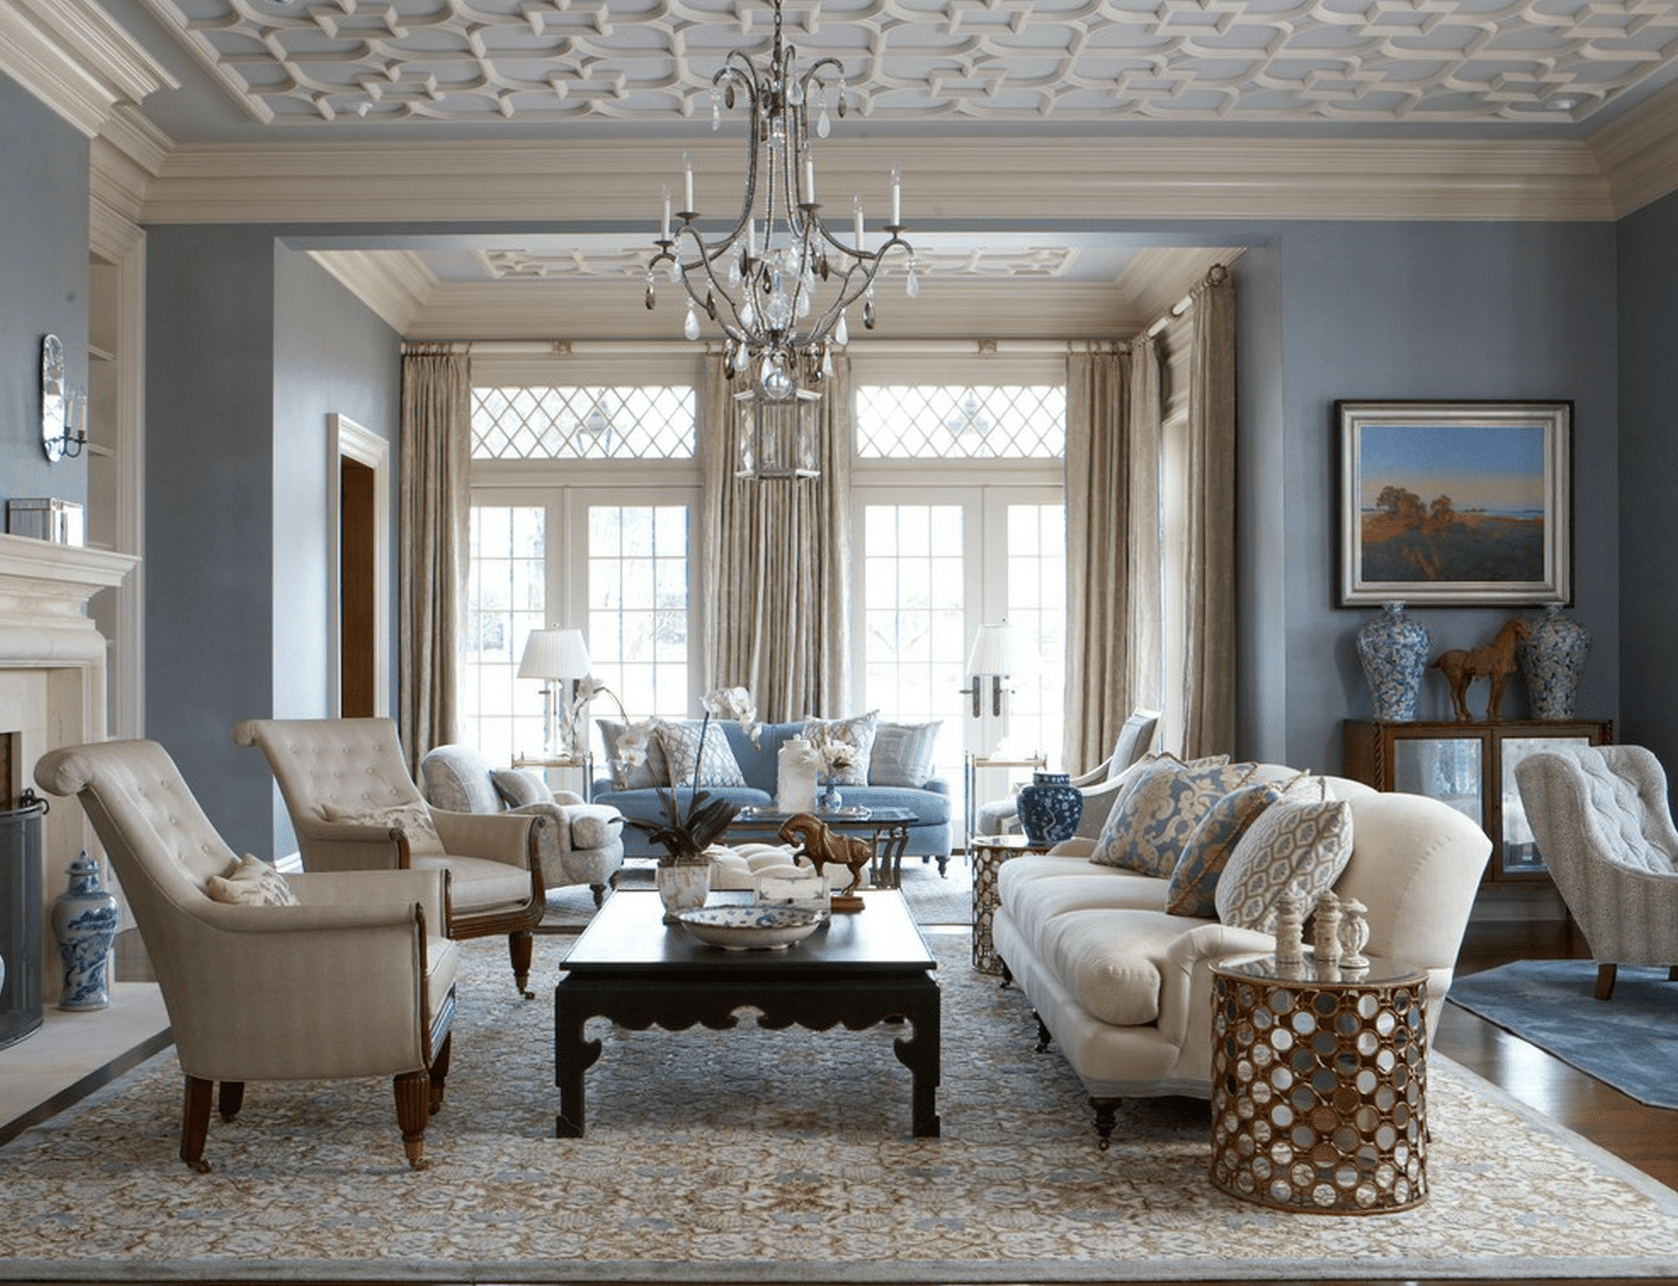 20 Timeless Ideas To Decorate Cozy Classic Living Room